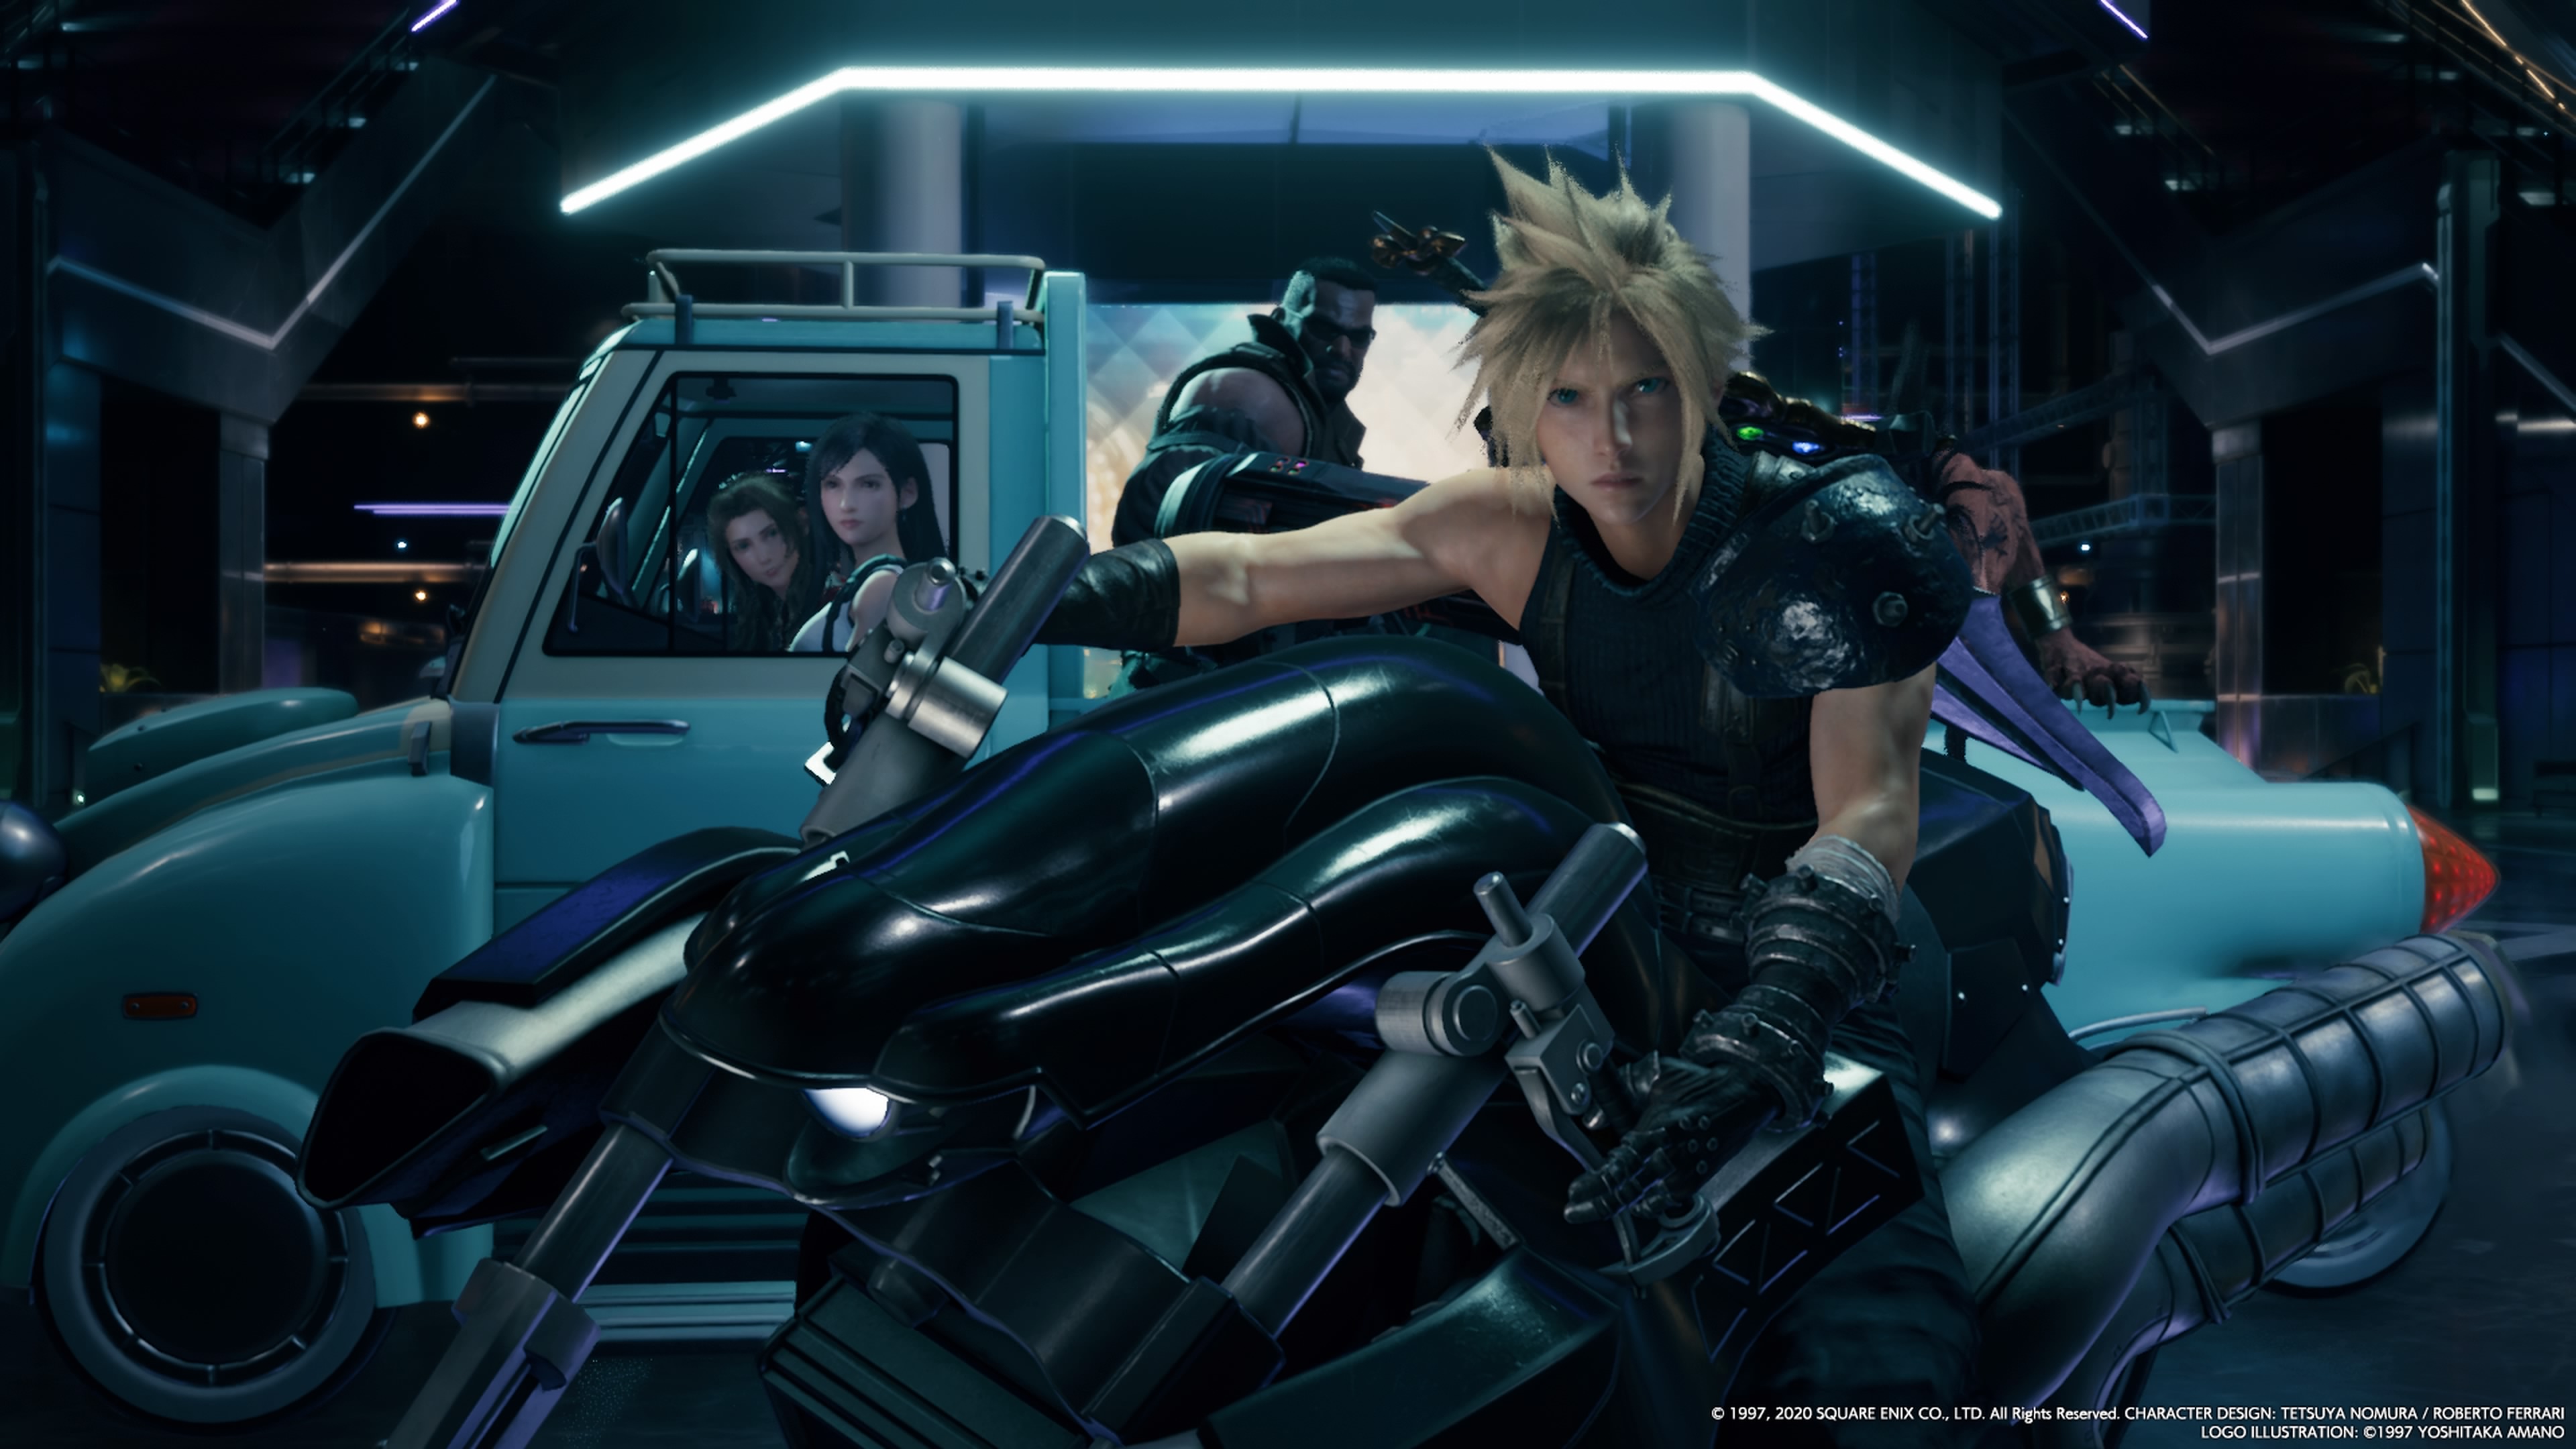 Final Fantasy 7 Remake: How To Beat The Top Secret Boss